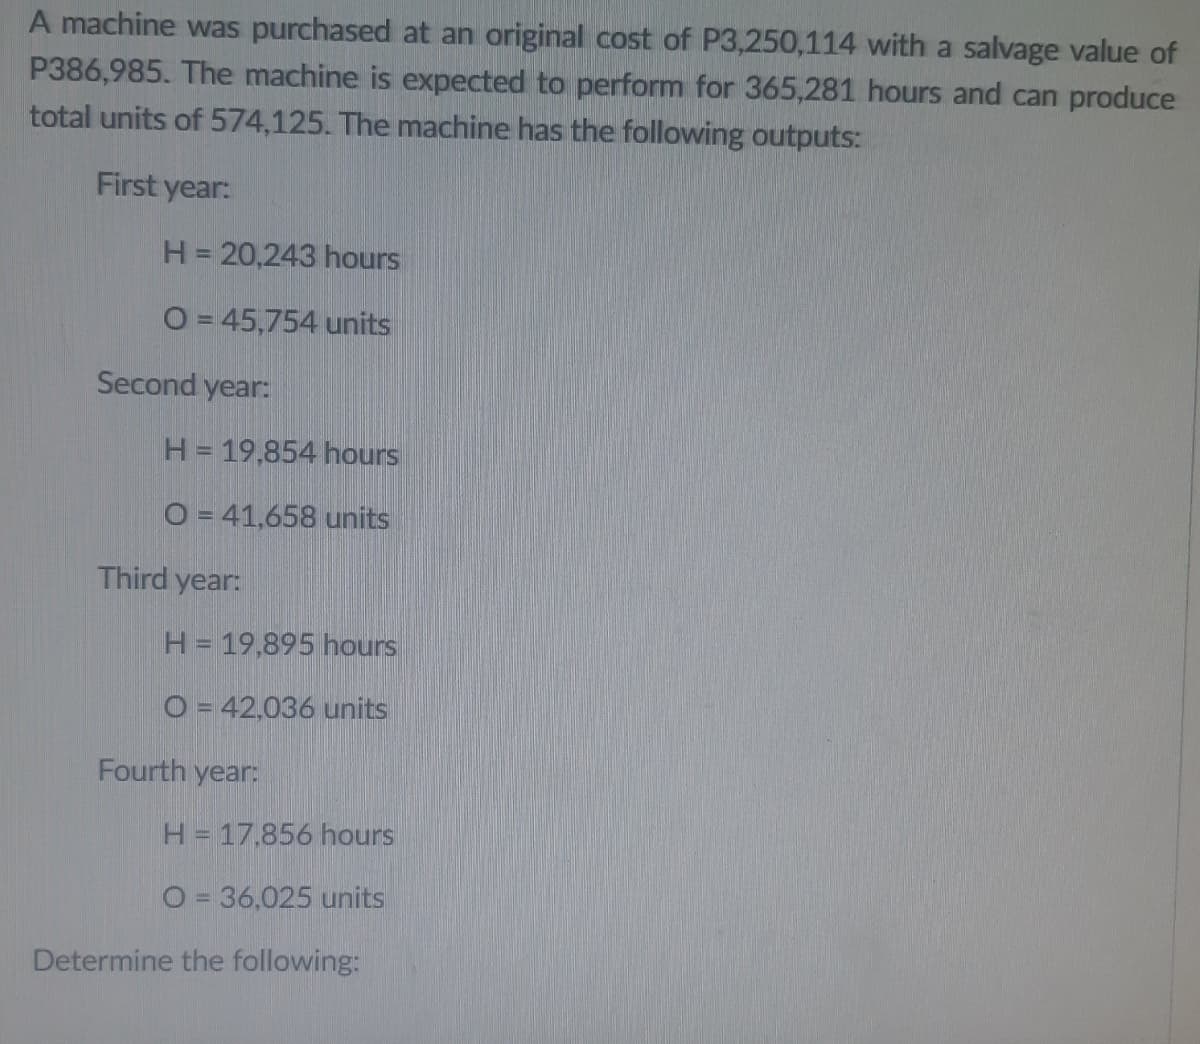 A machine was purchased at an original cost of P3,250,114 with a salvage value of
P386,985. The machine is expected to perform for 365,281 hours and can produce
total units of 574,125. The machine has the following outputs:
First year:
H = 20,243 hours
O = 45,754 units
Second year:
H = 19,854 hours
O = 41,658 units
Third year:
H = 19,895 hours
O= 42,036 units
Fourth year:
H = 17,856 hours
O = 36,025 units
Determine the following: